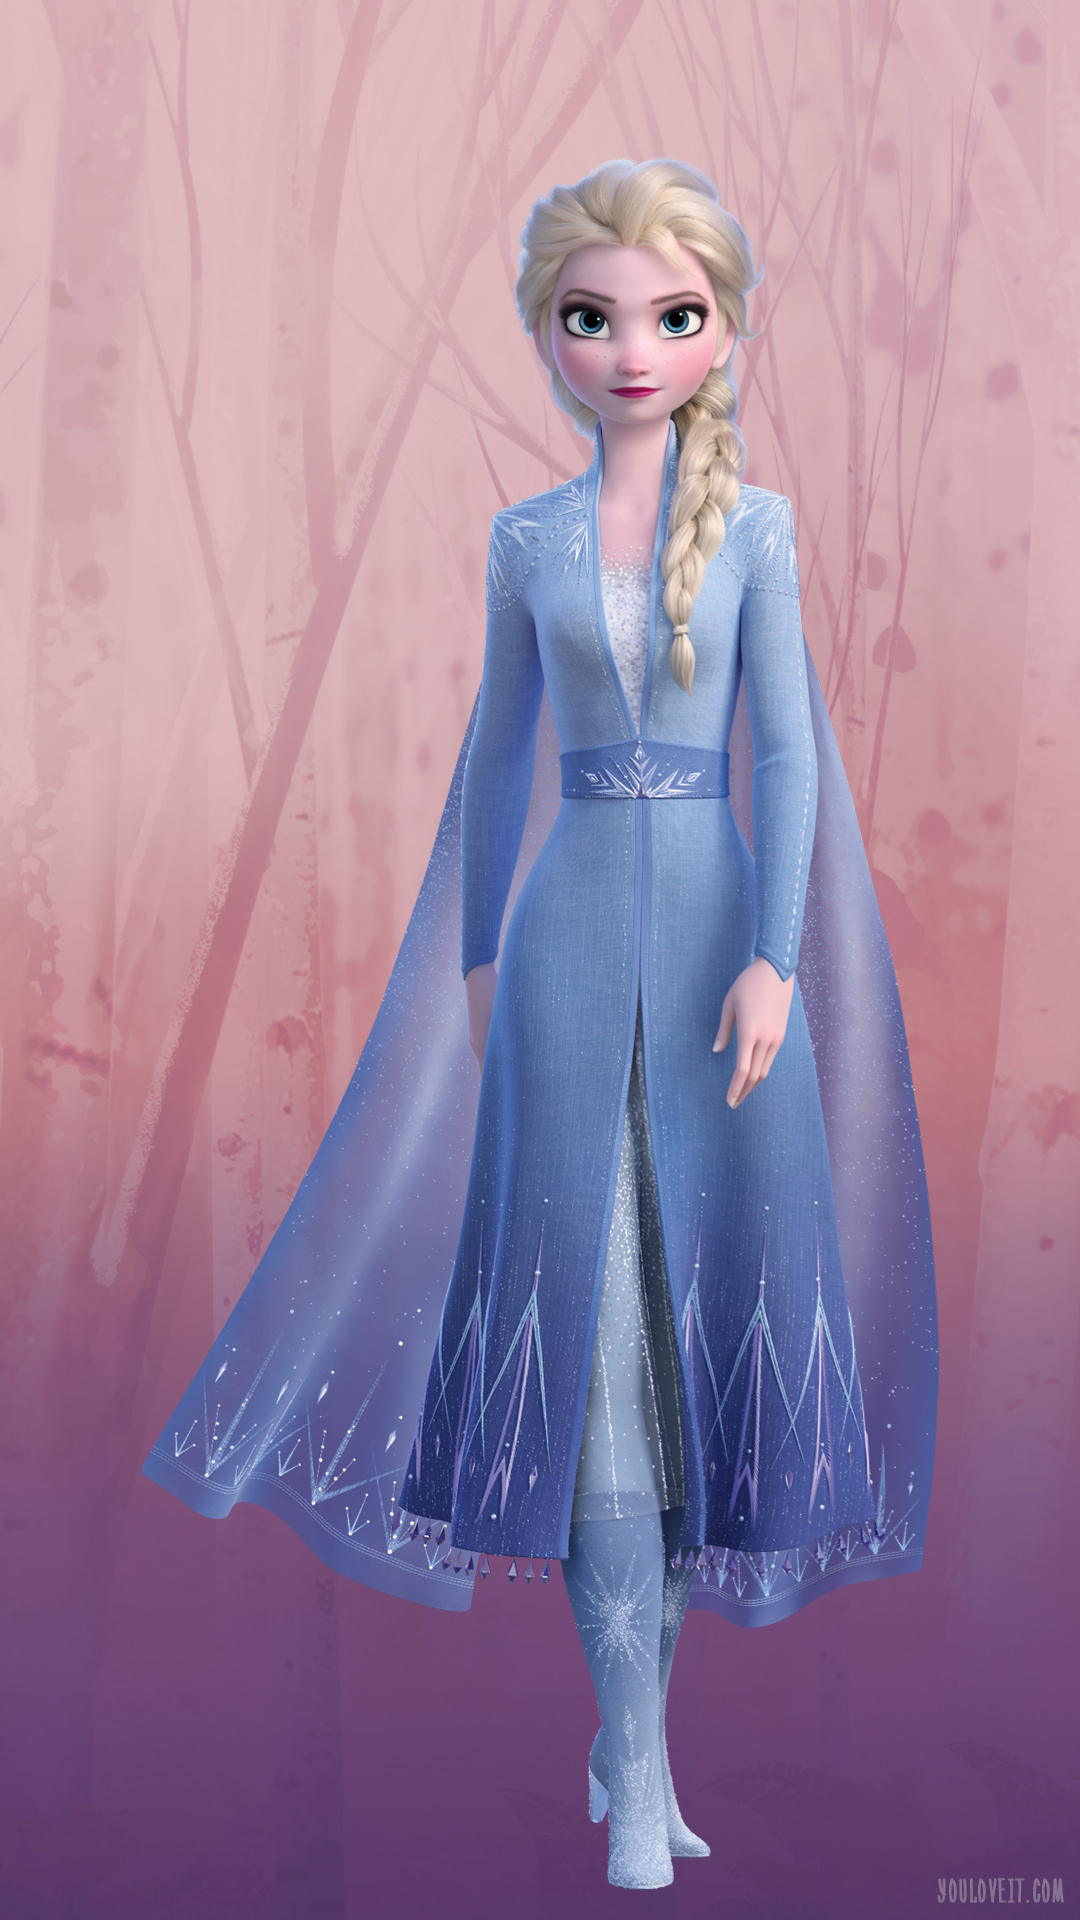 Big Frozen Phone Wallpaper With Elsa Youloveit